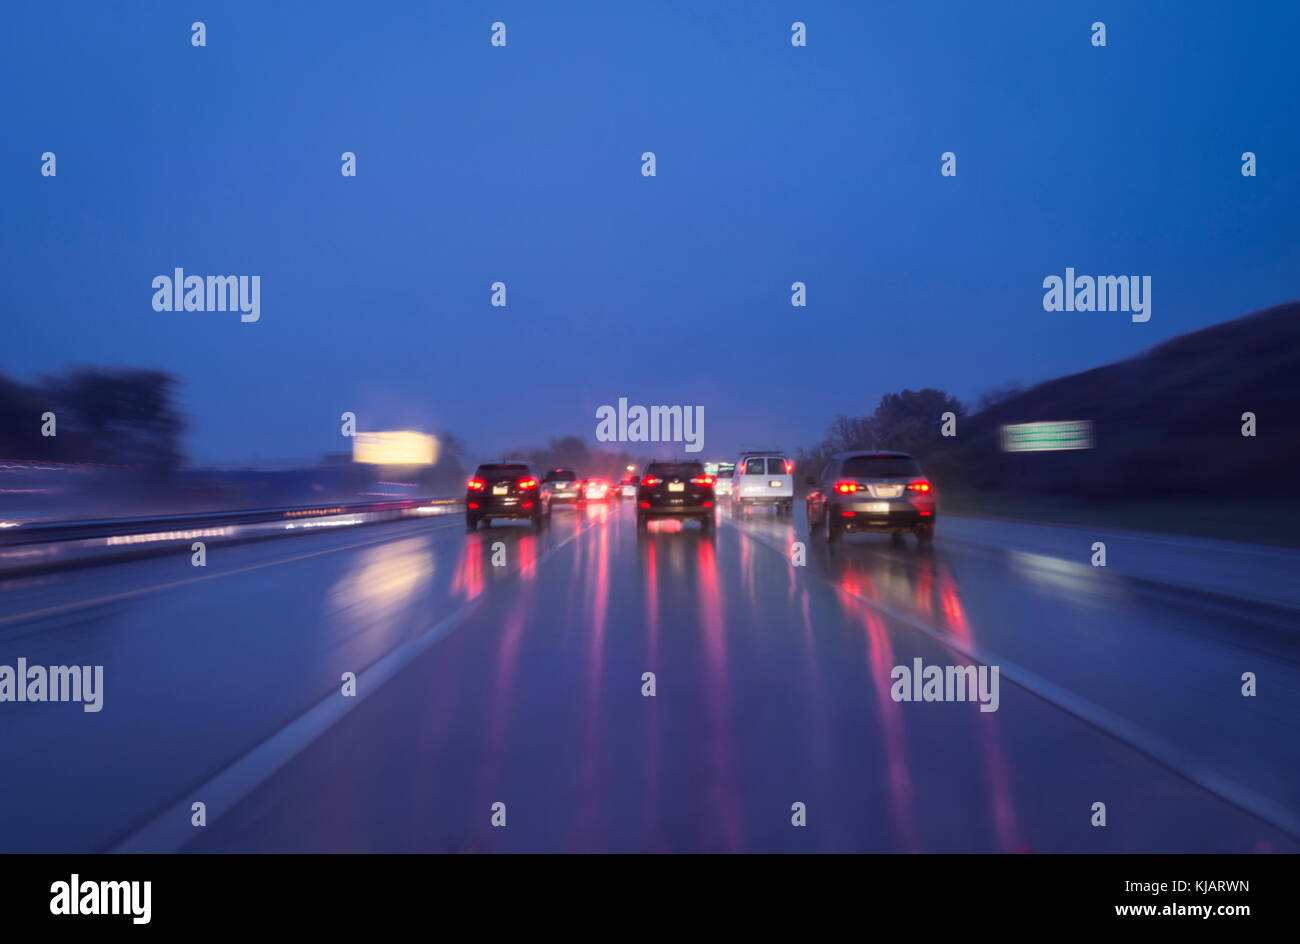 Cars On Highway In The Rain At Night Blurry Stock Photo